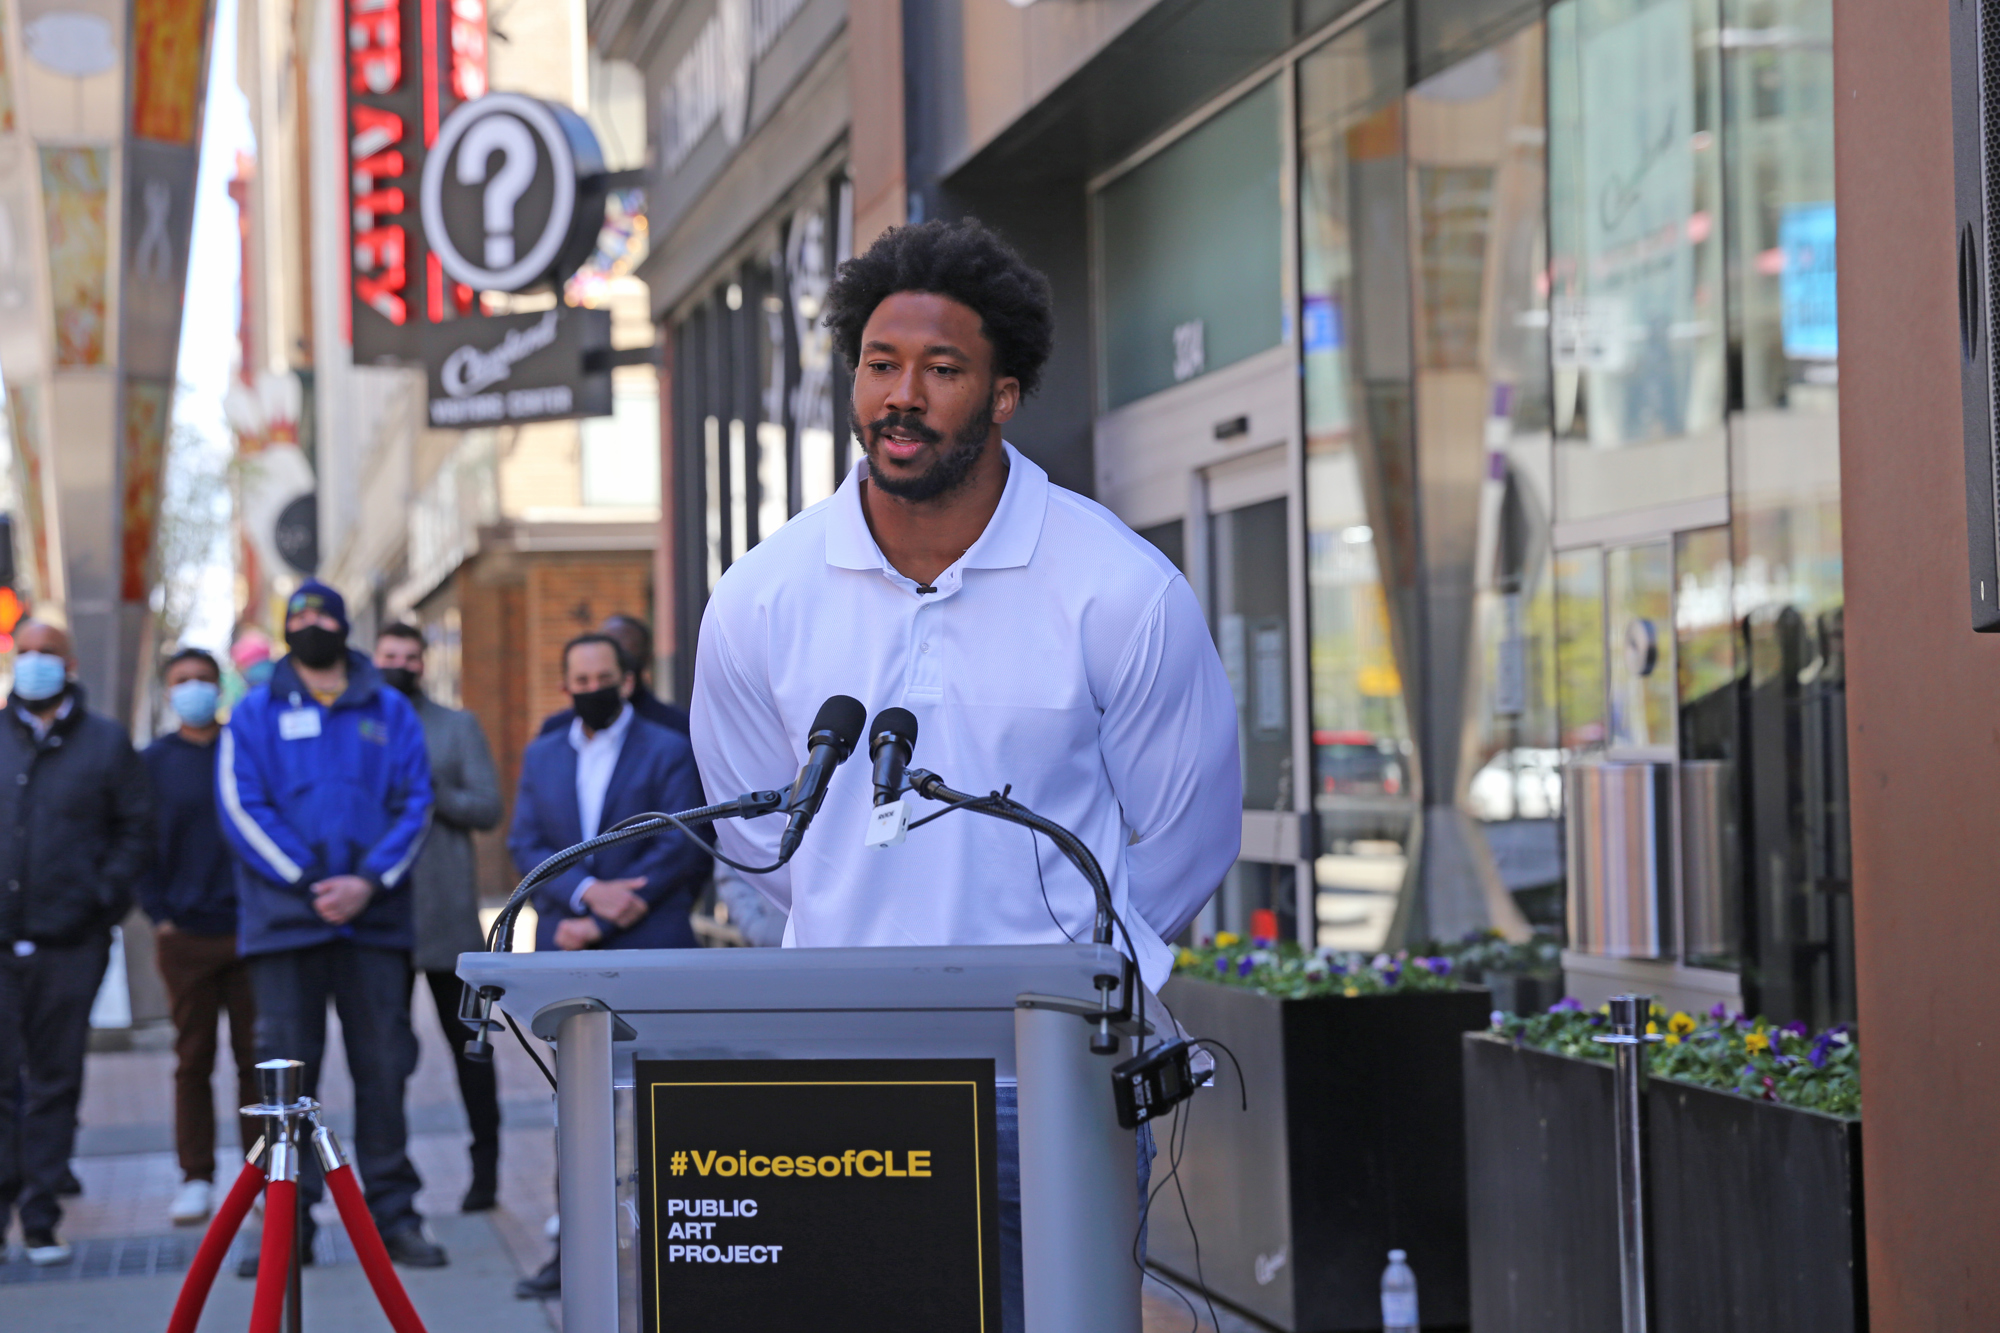 Voices of CLE murals commissioned by Myles Garrett - cleveland.com